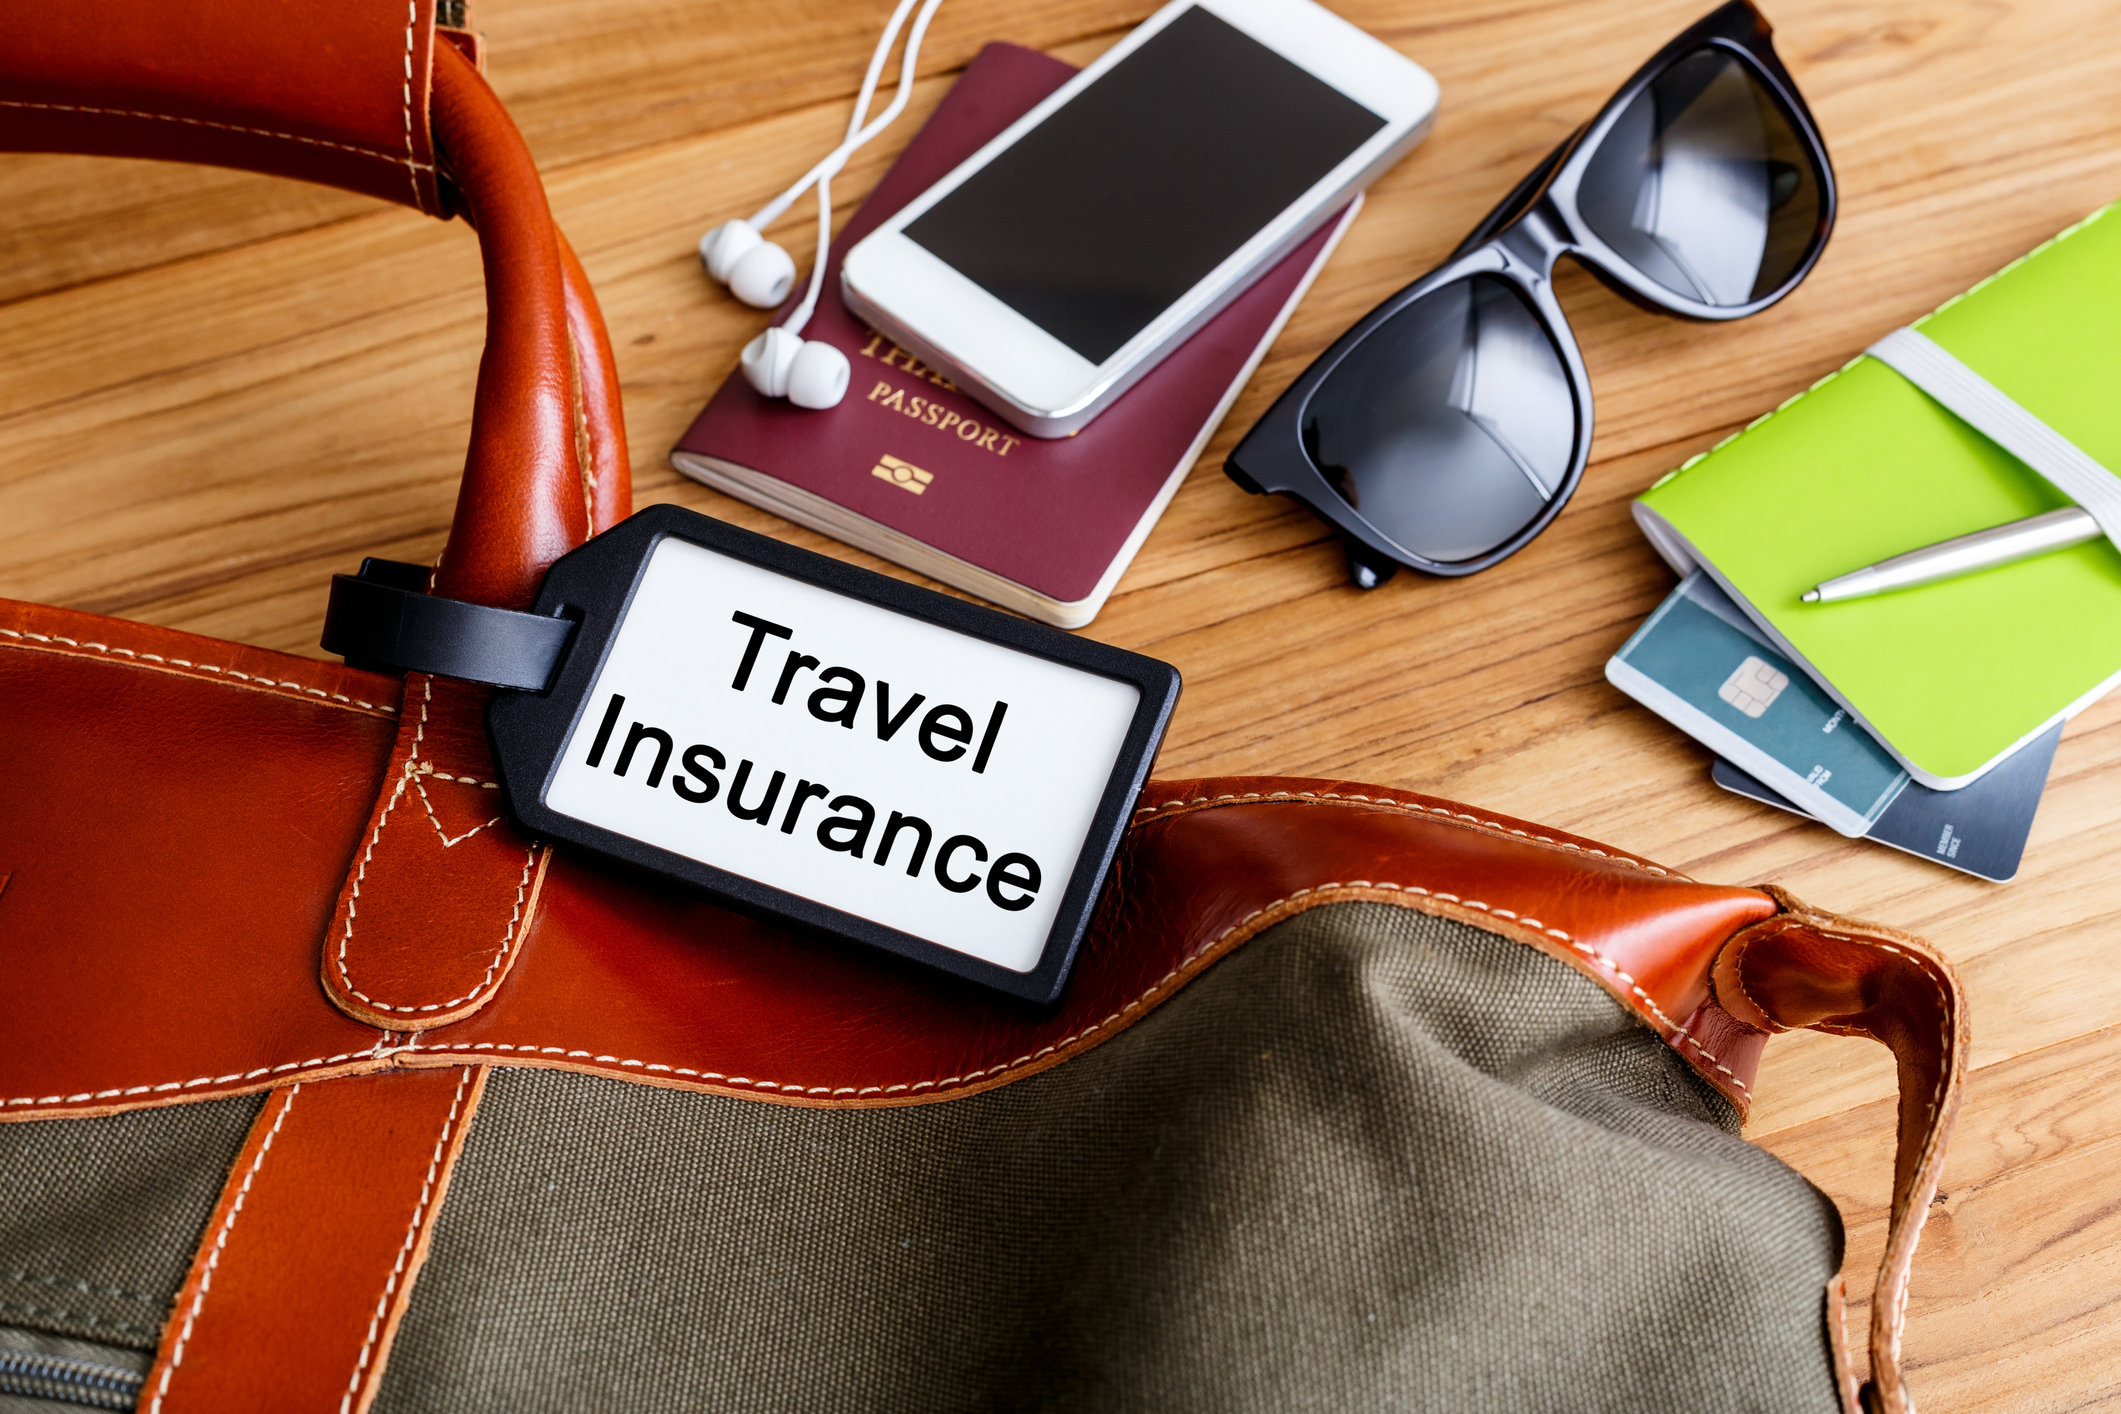 Travel bag with insurance tag and tourist accessories